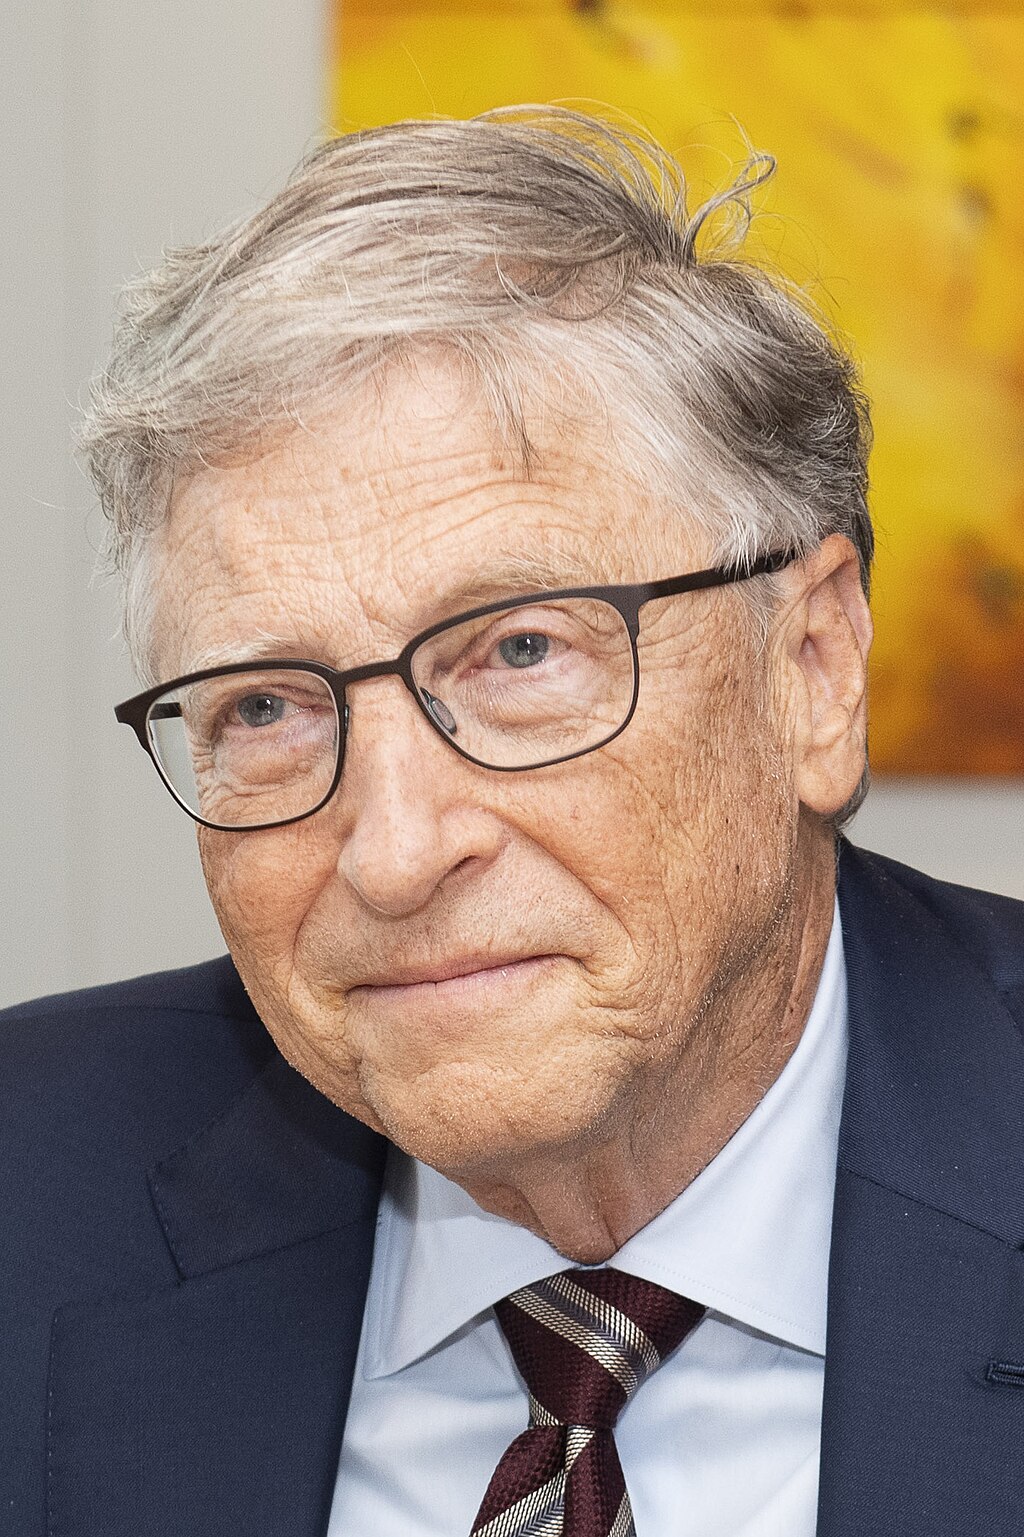 Bill Gates says Nuclear Power vital to fully decarbonise power grids